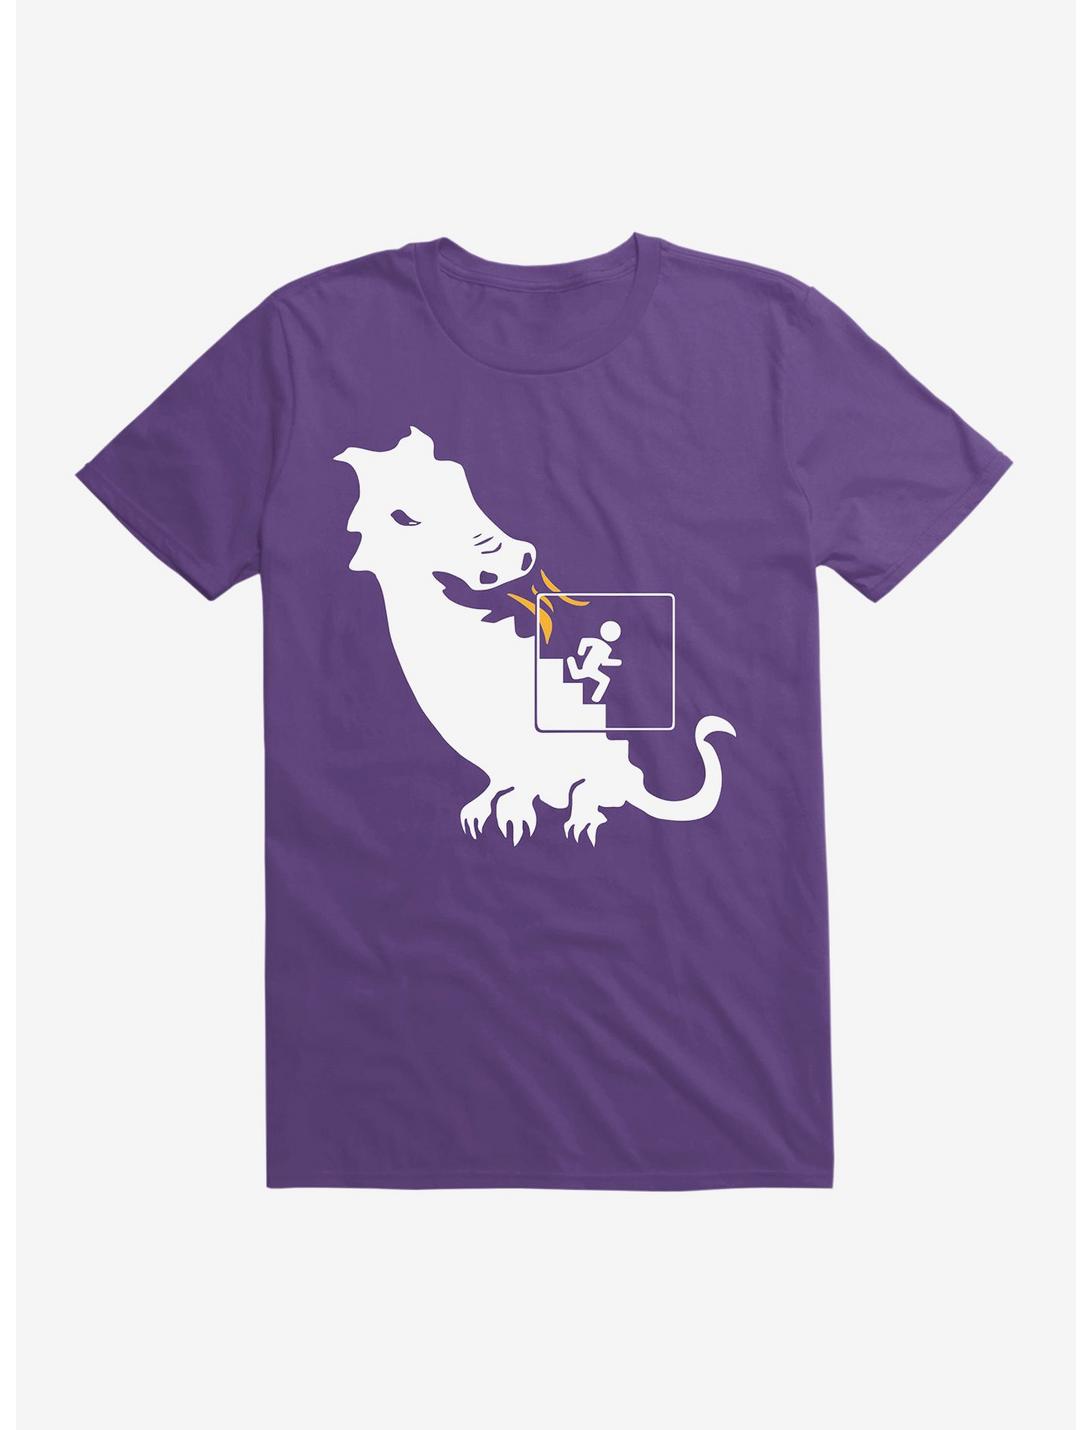 The Rest Of The Story T-Shirt, PURPLE, hi-res